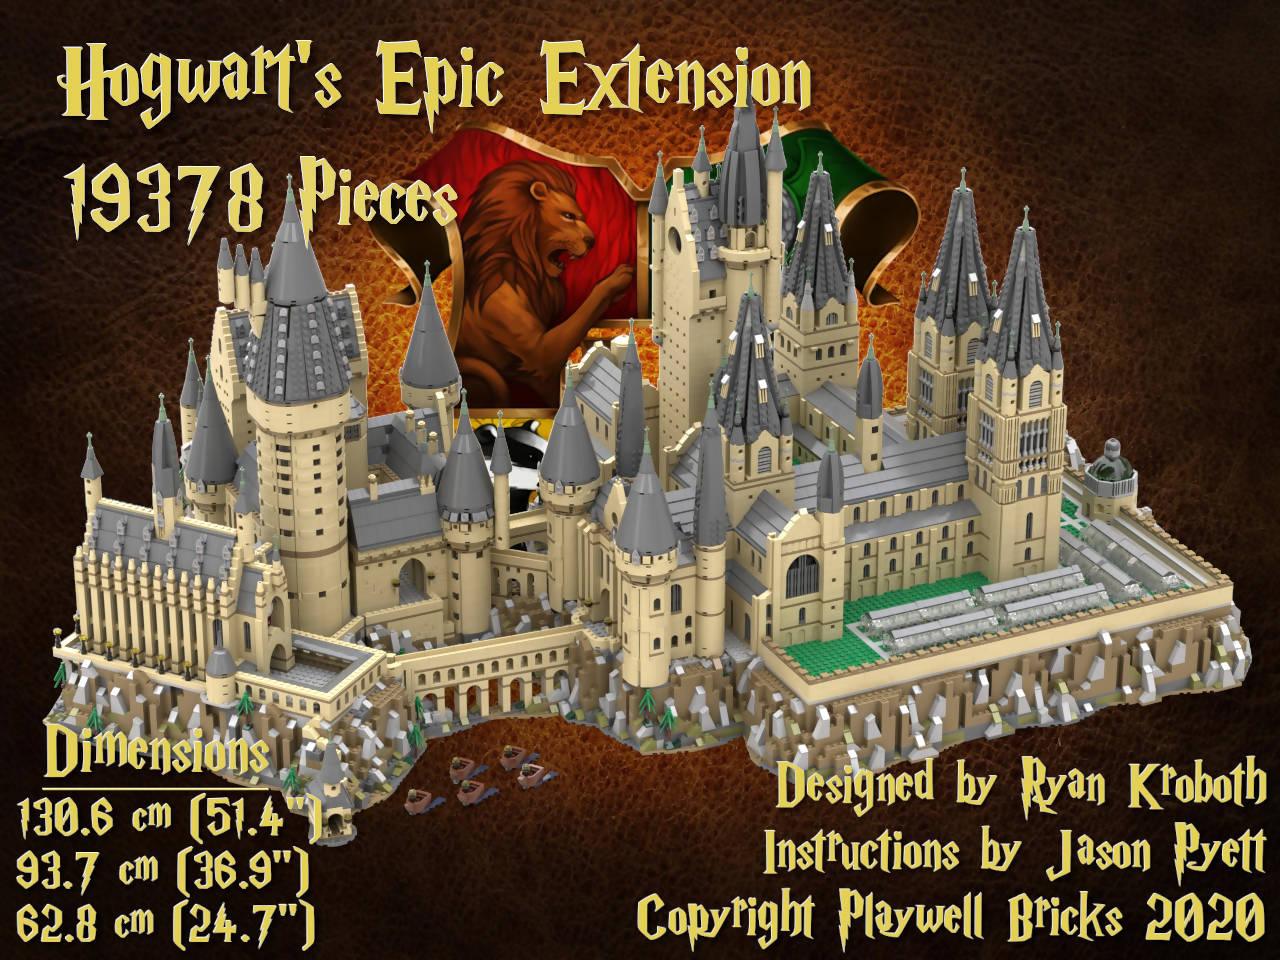 HOGWARTS CASTLE BY NOBLE COLLECTION PLUS #GUINNESSWORLDRECORD UPDATE 